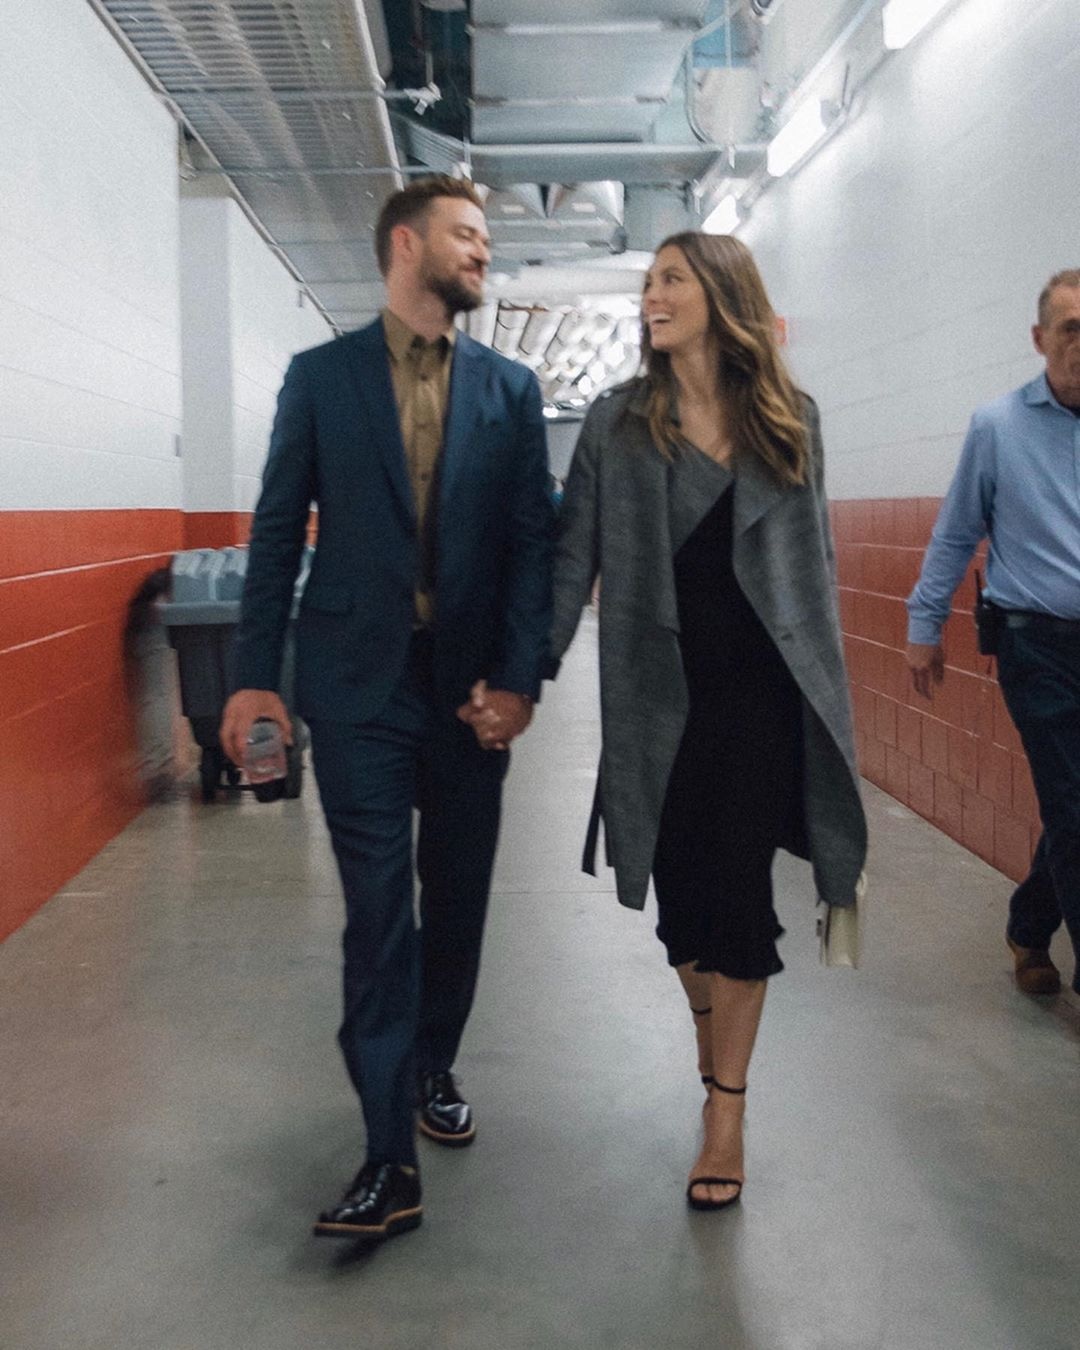 Inside Jessica Biel and Justin Timberlake's Most Intense Year Yet